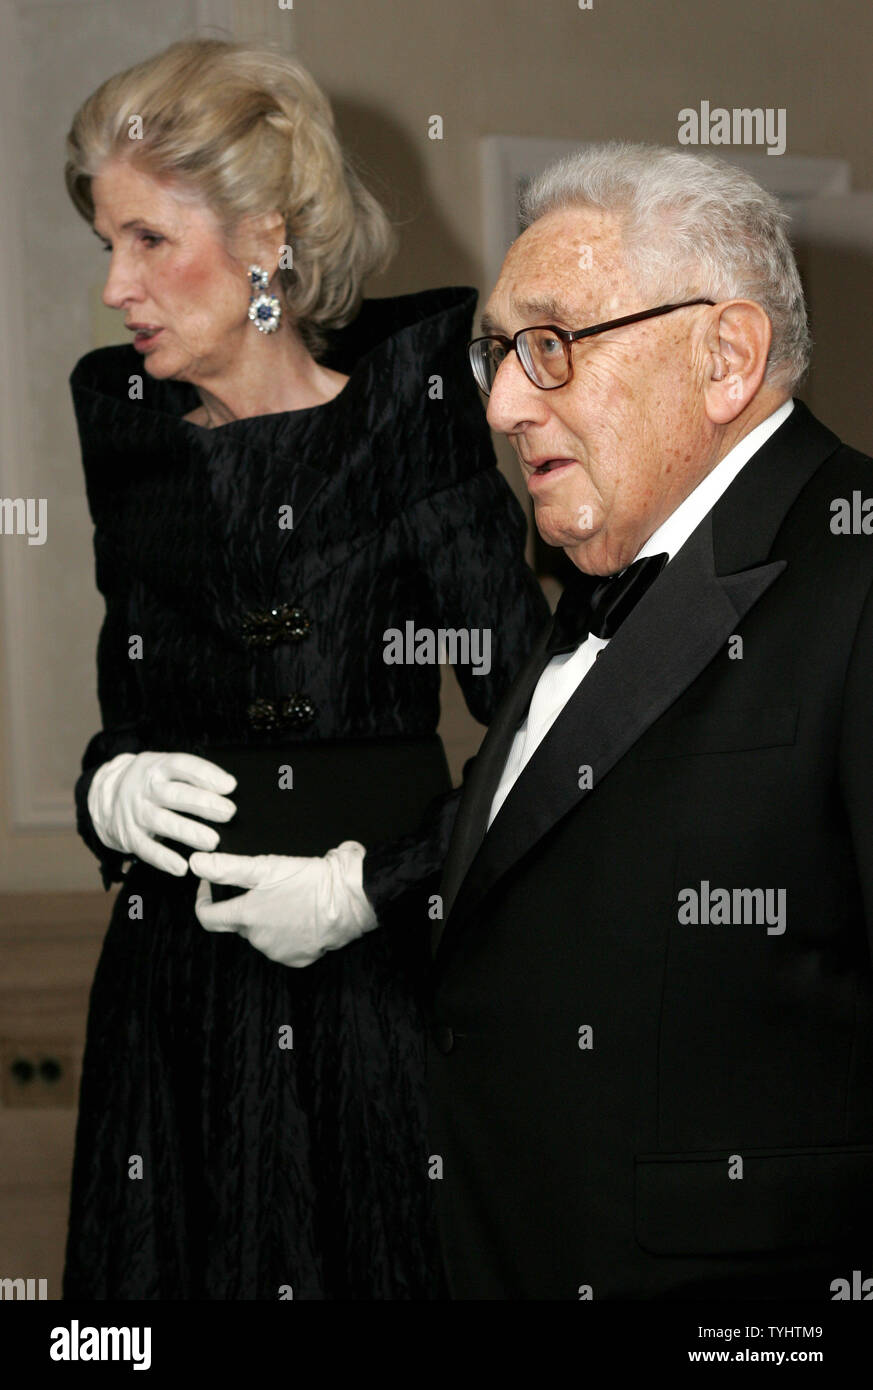 Former Secretary of State Henry Kissinger is accompanied by his wife Nancy as they arrive to the Leo Baeck Institute award dinner on November 29, 2006 in New York City. The institute is dedicated to the study of German-Jewish history by offering research archives and operating a library and a museum. (UPI Photo/Monika Graff) Stock Photo